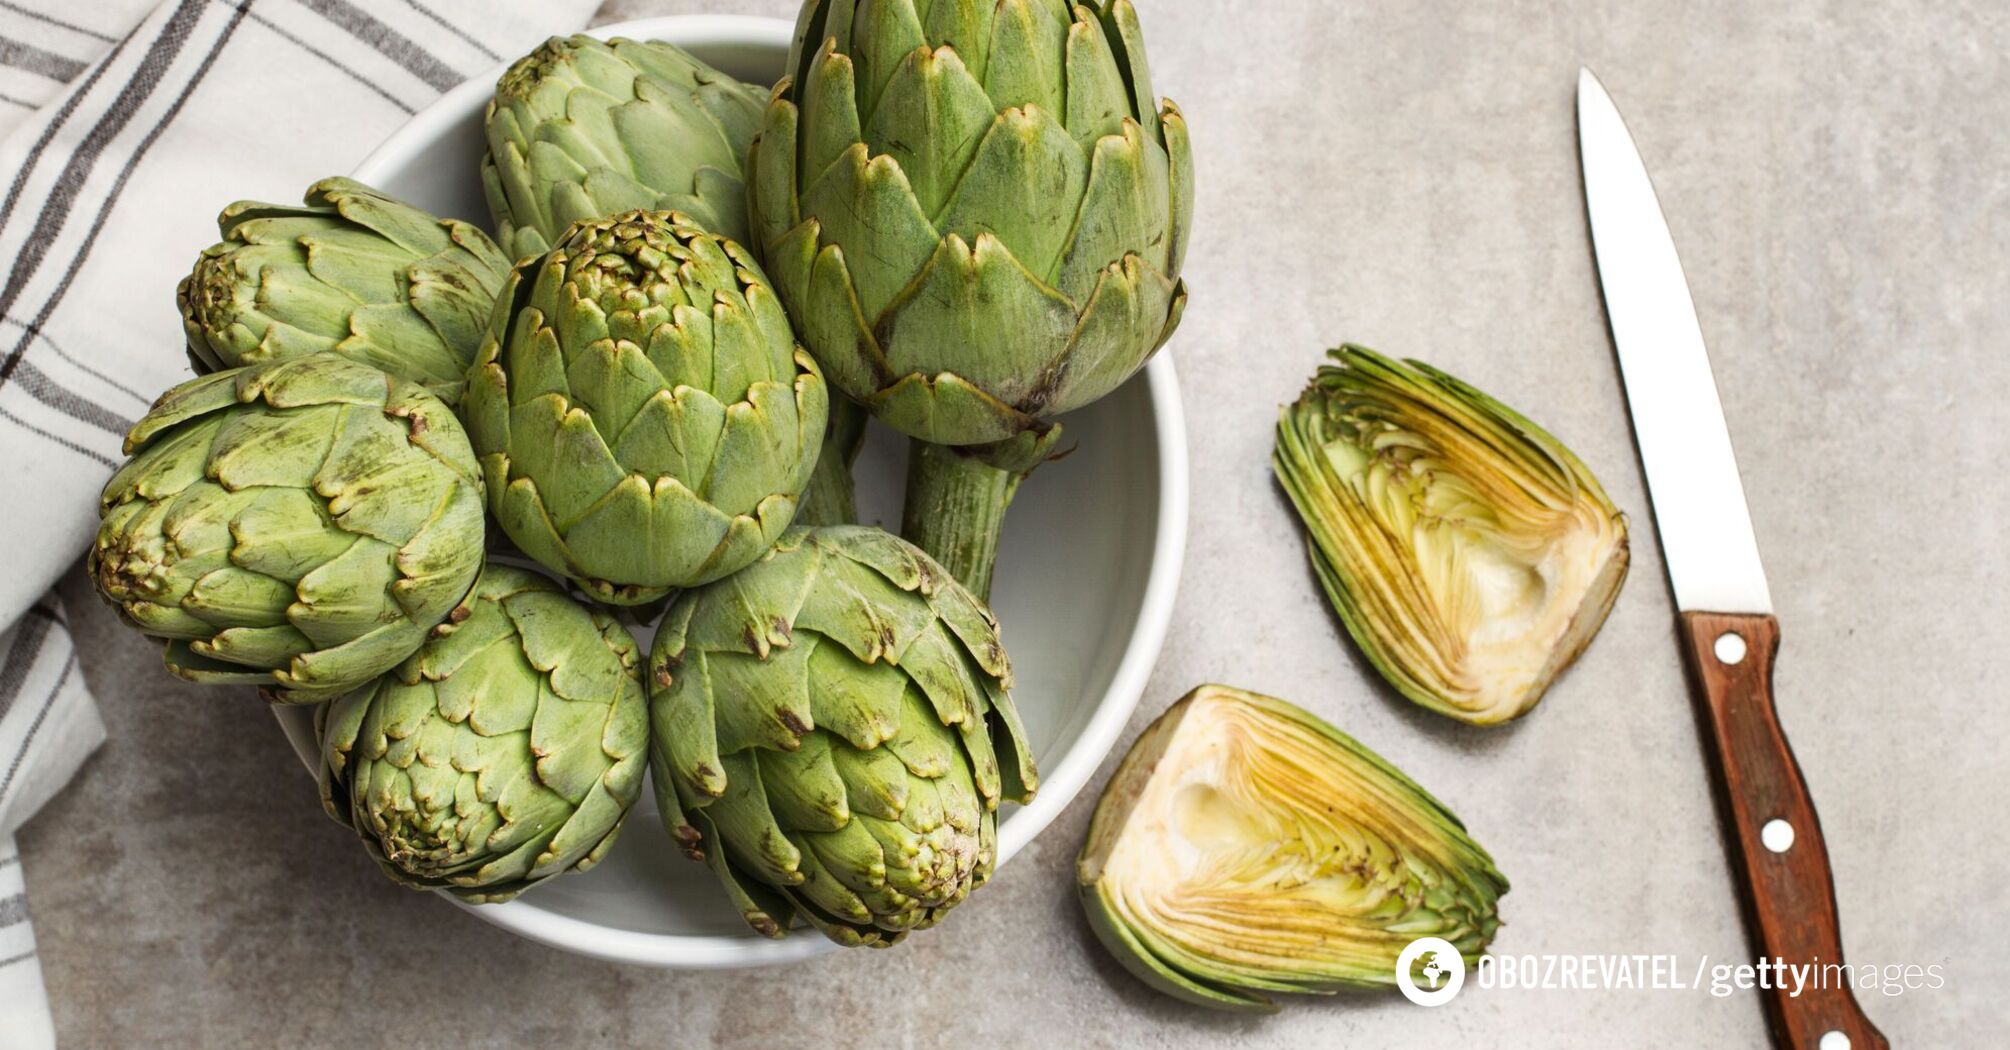 How to cook artichokes at home